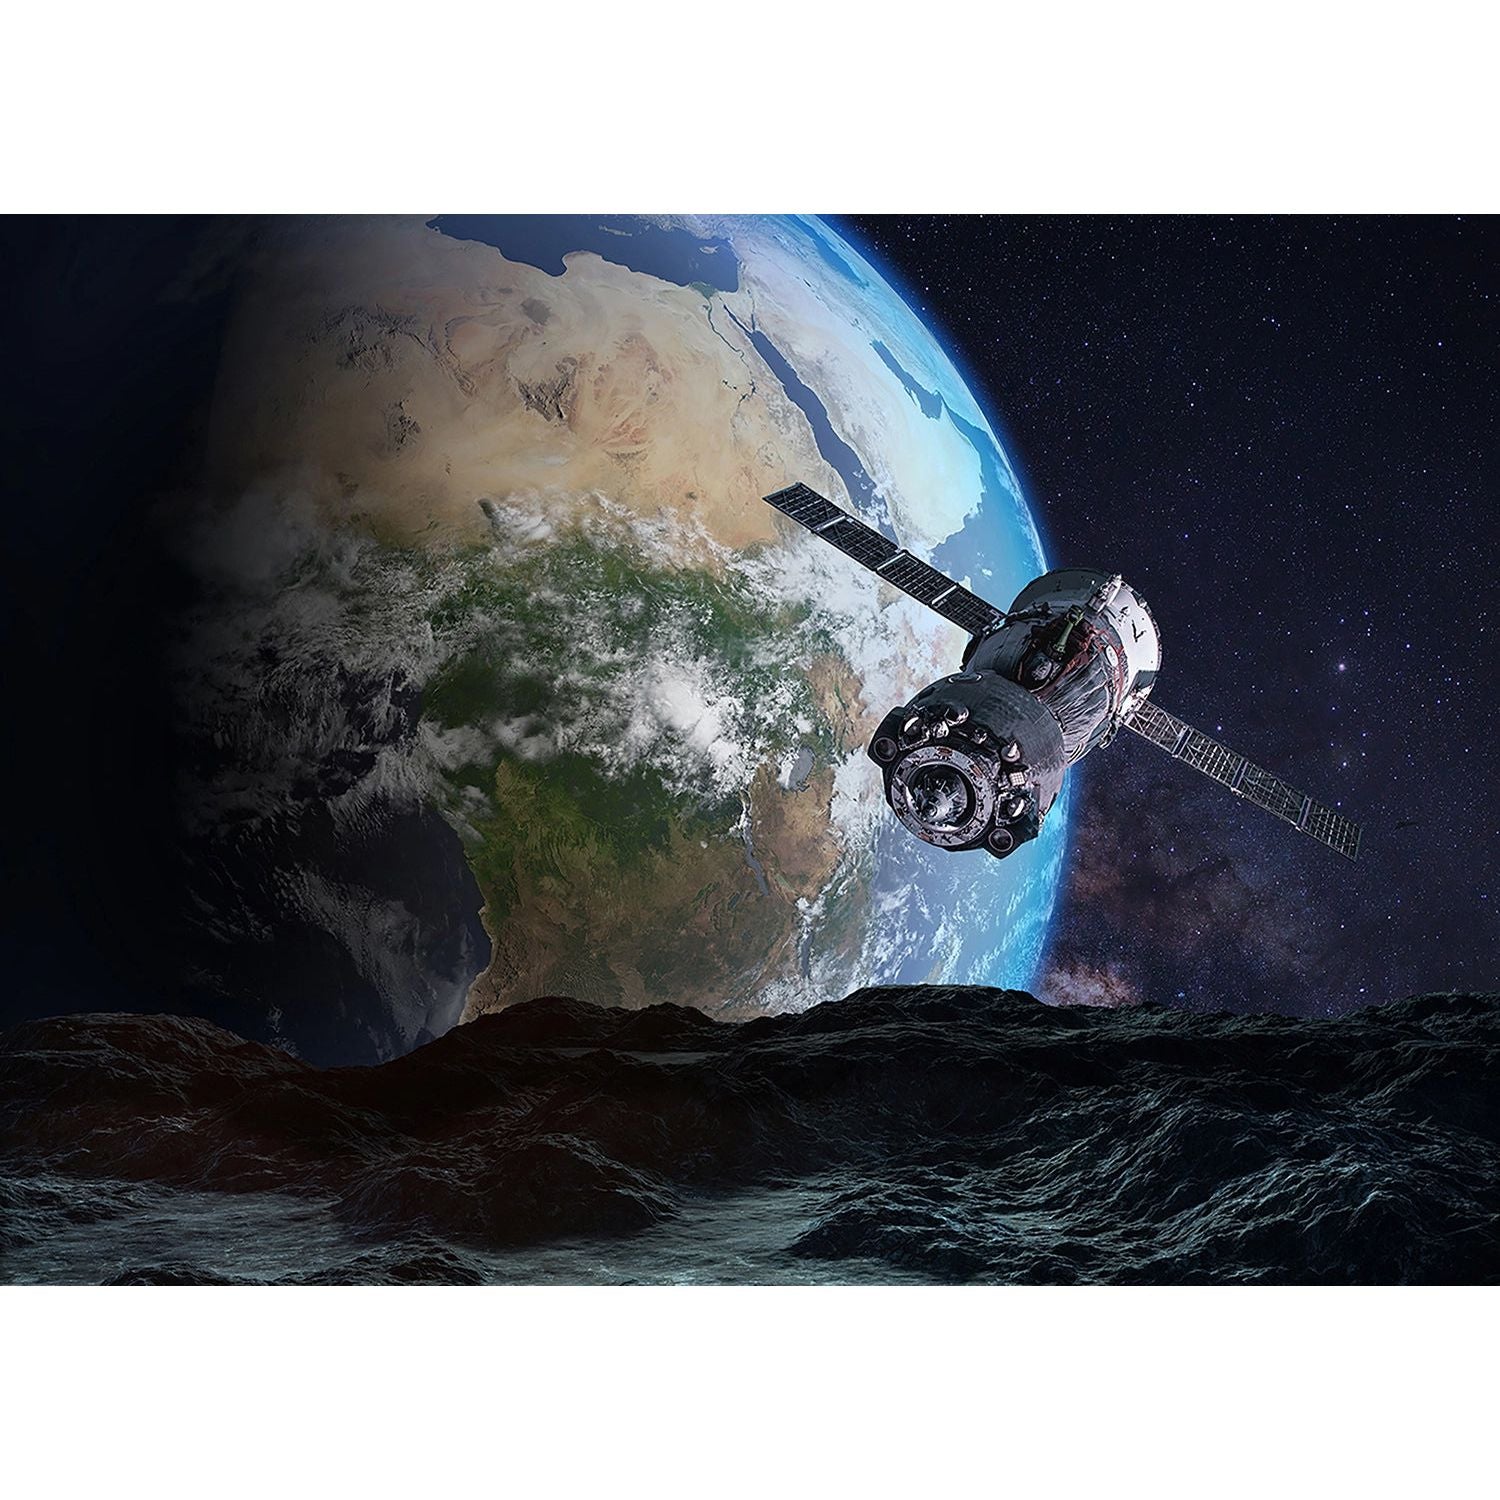 Cosmic Voyage: A Spacecraft's Journey Wall Mural